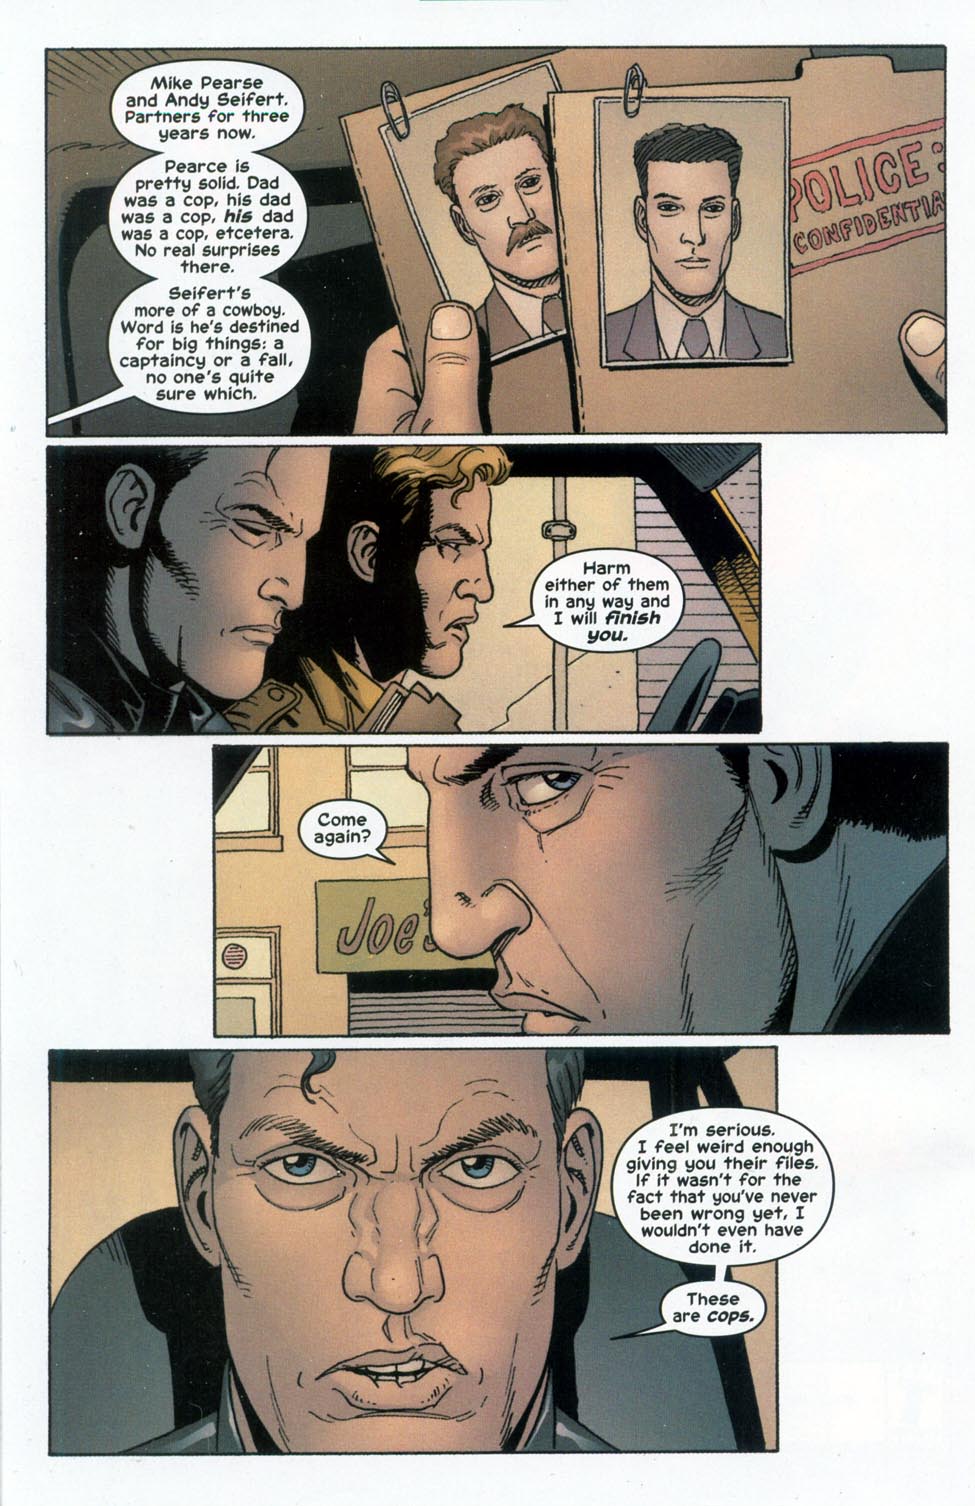 The Punisher (2001) issue 20 - Brotherhood #01 - Page 8